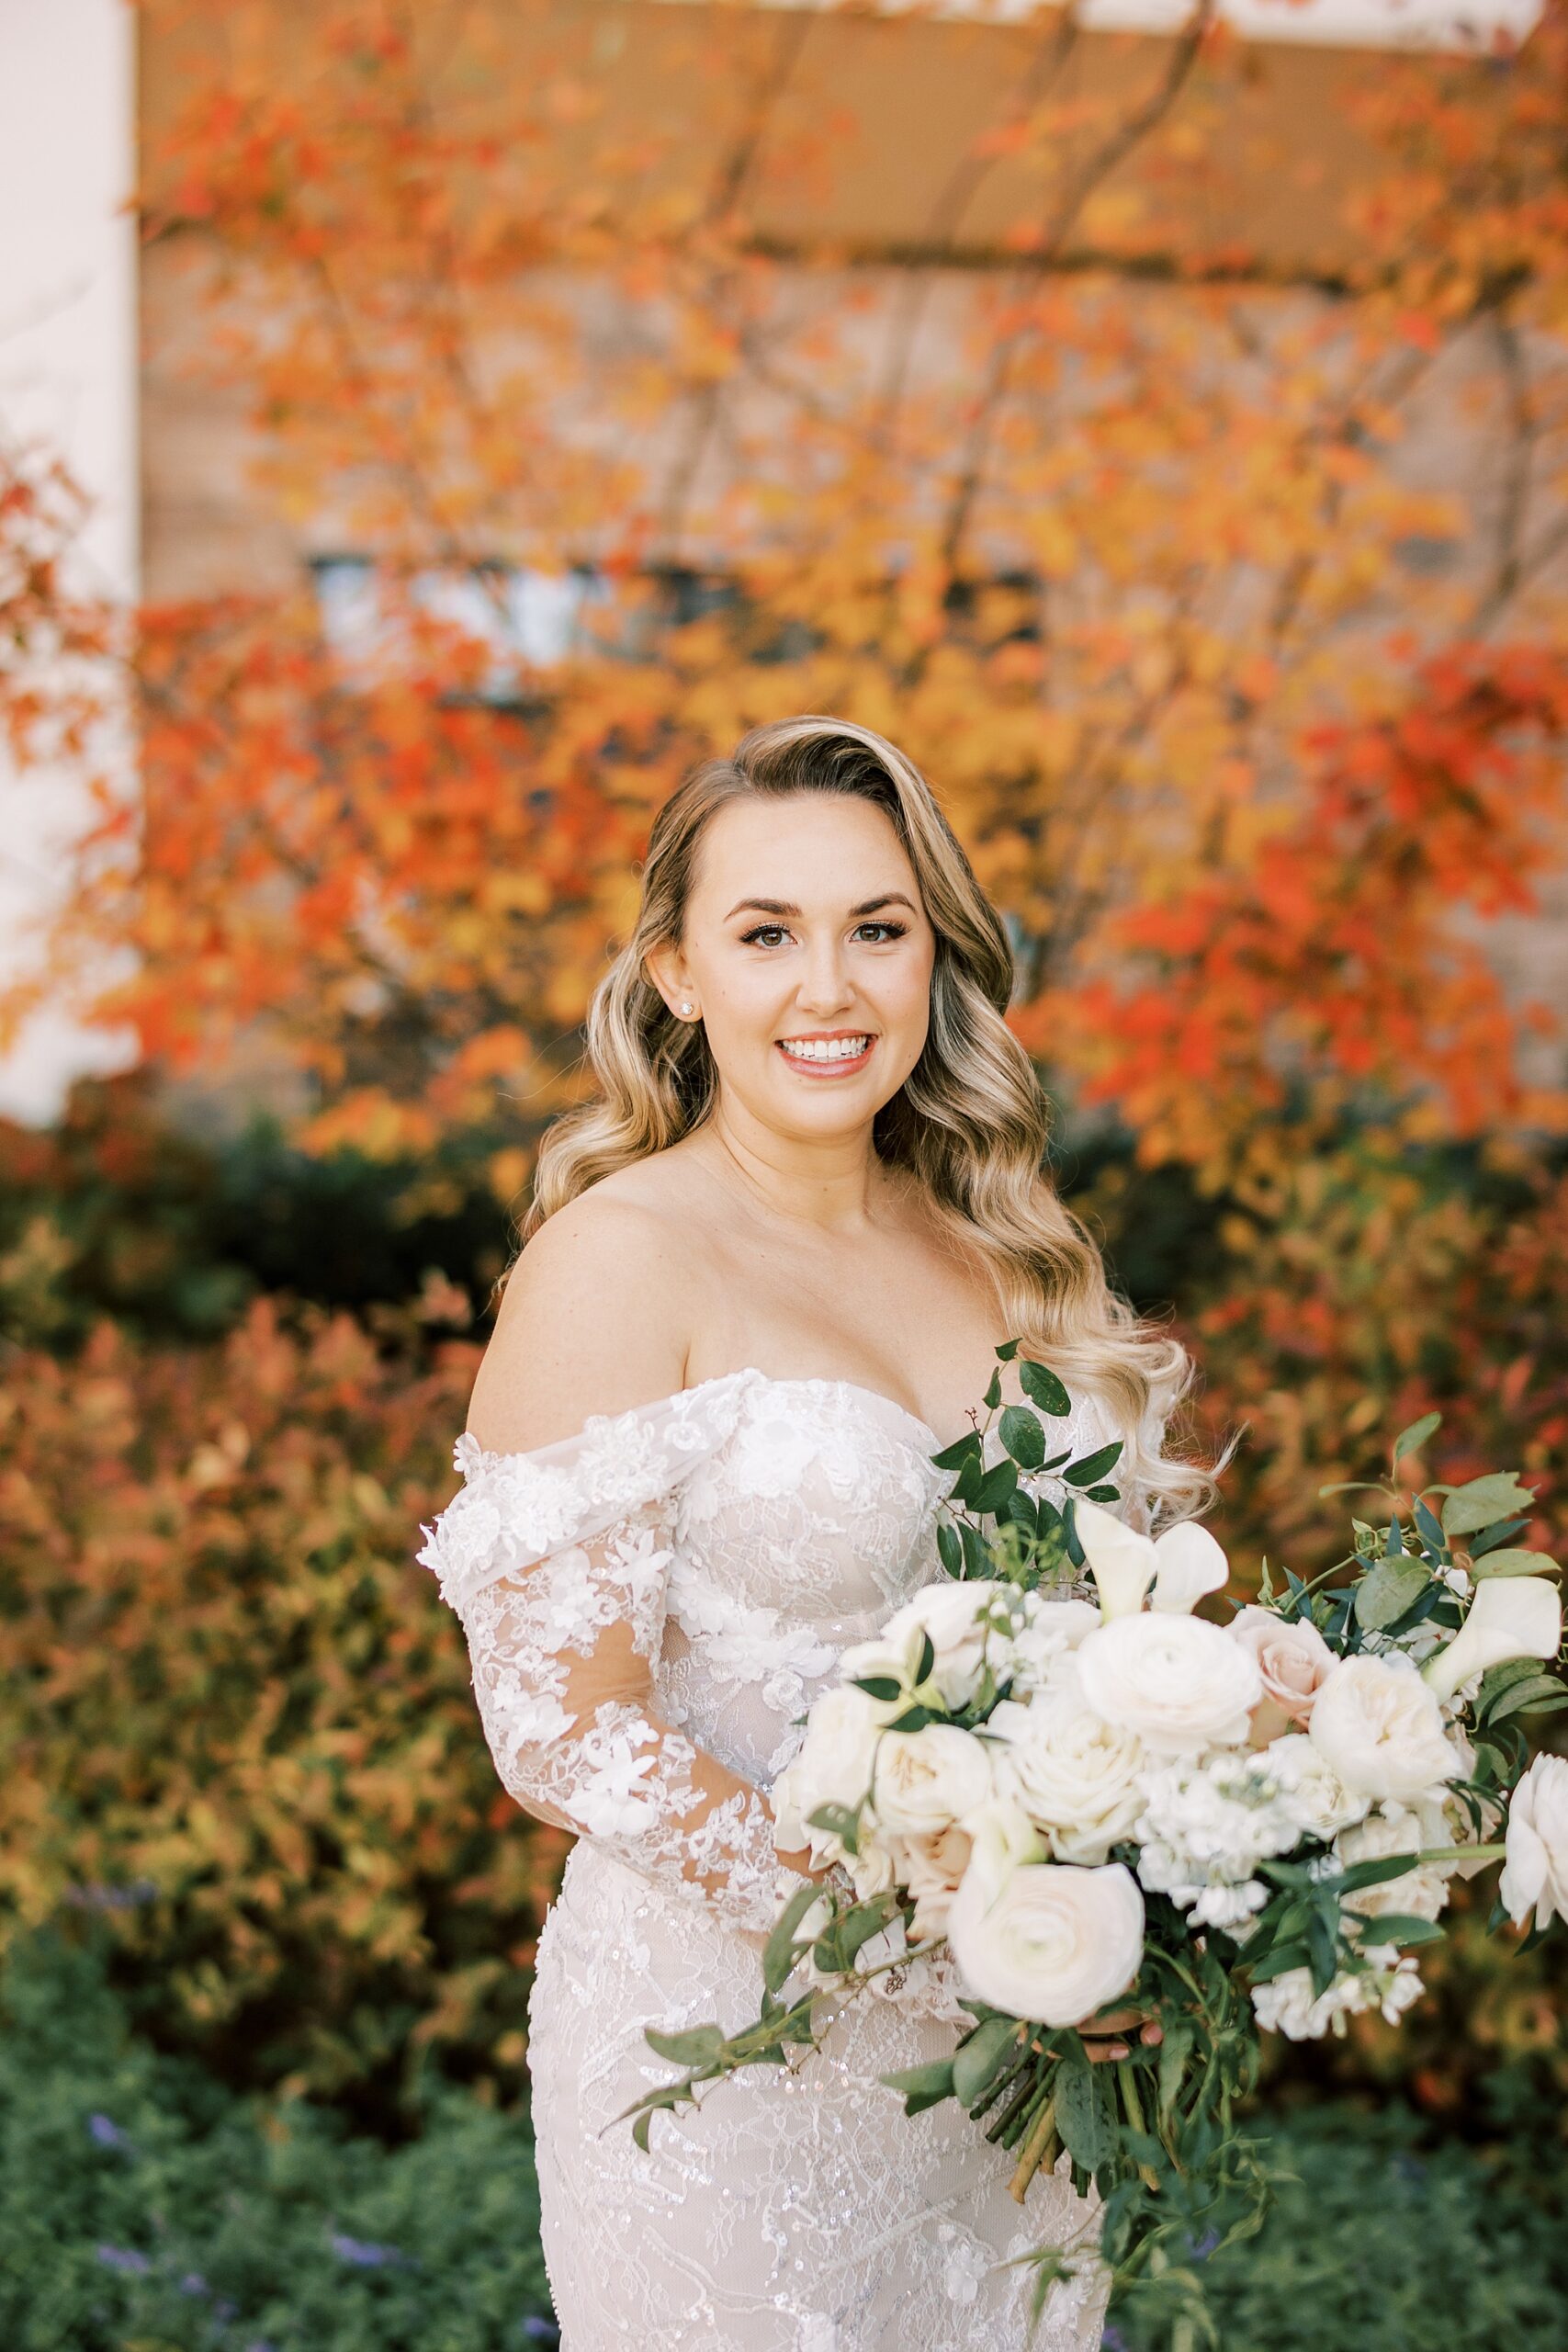 bride stands holding pink and white rose bouquet by orange laves on trees 